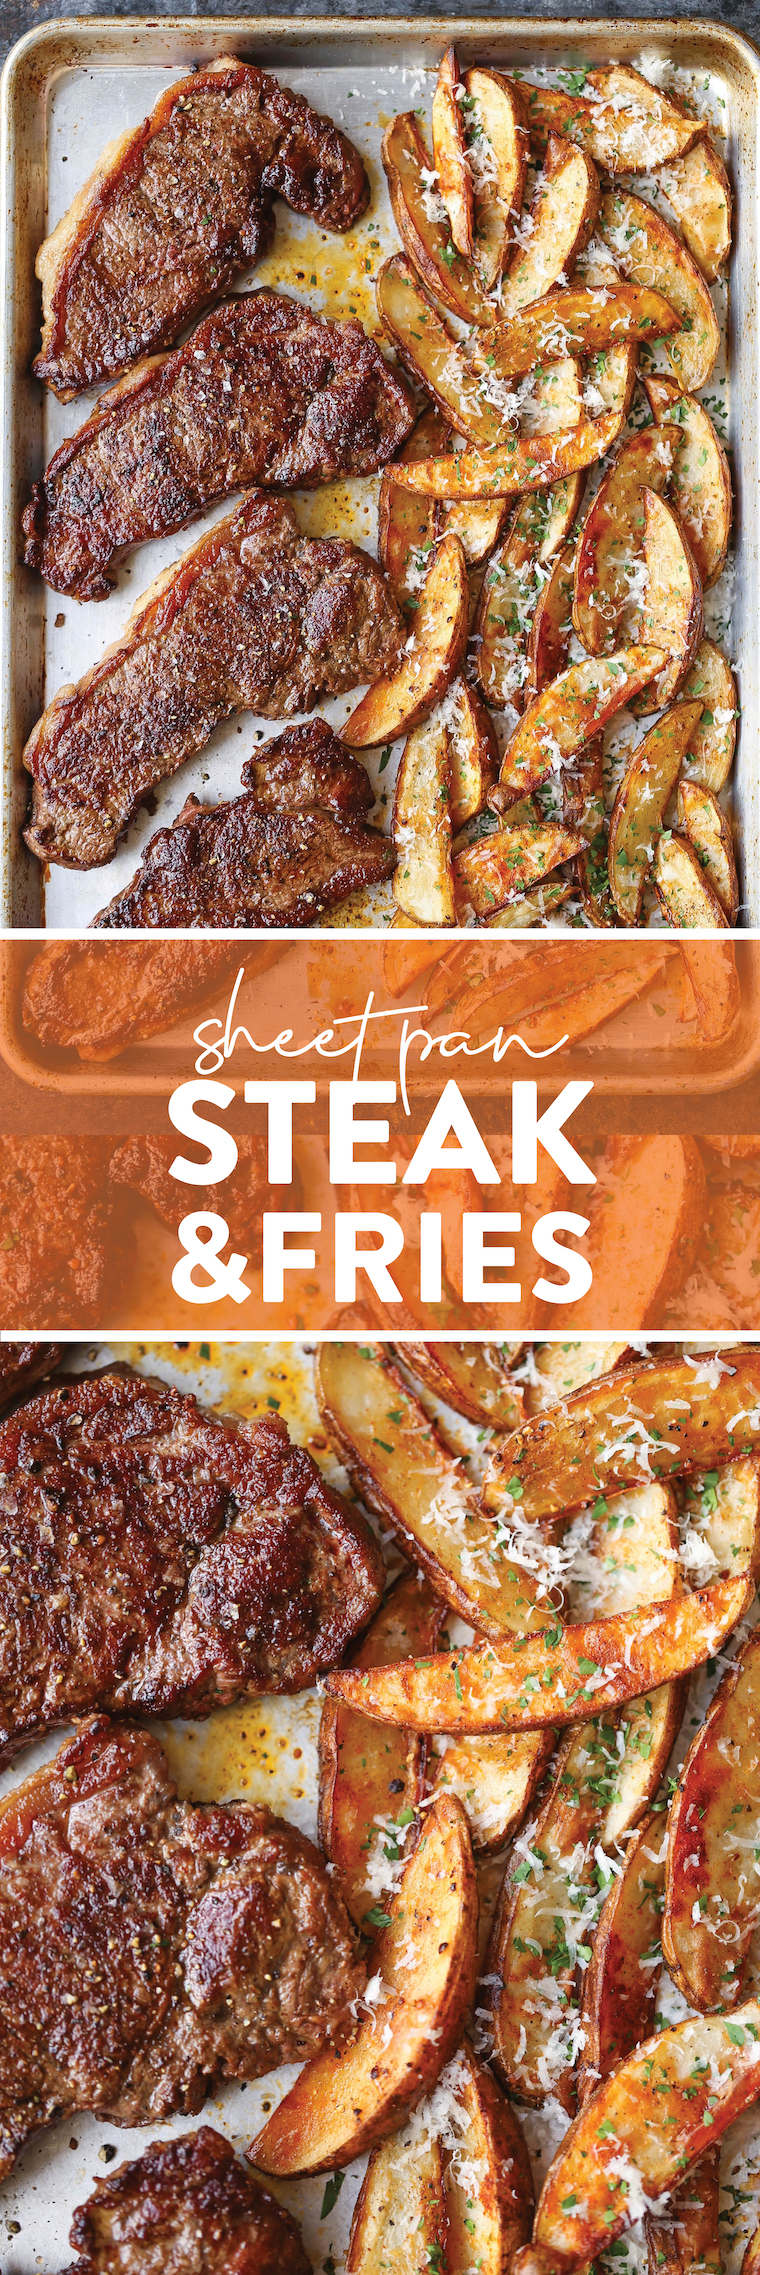 Sheet Pan Steak and Fries - The classic steak and fries easily made right on a sheet pan on ONE PAN! Bake your fries first, then add the steaks! EASY!